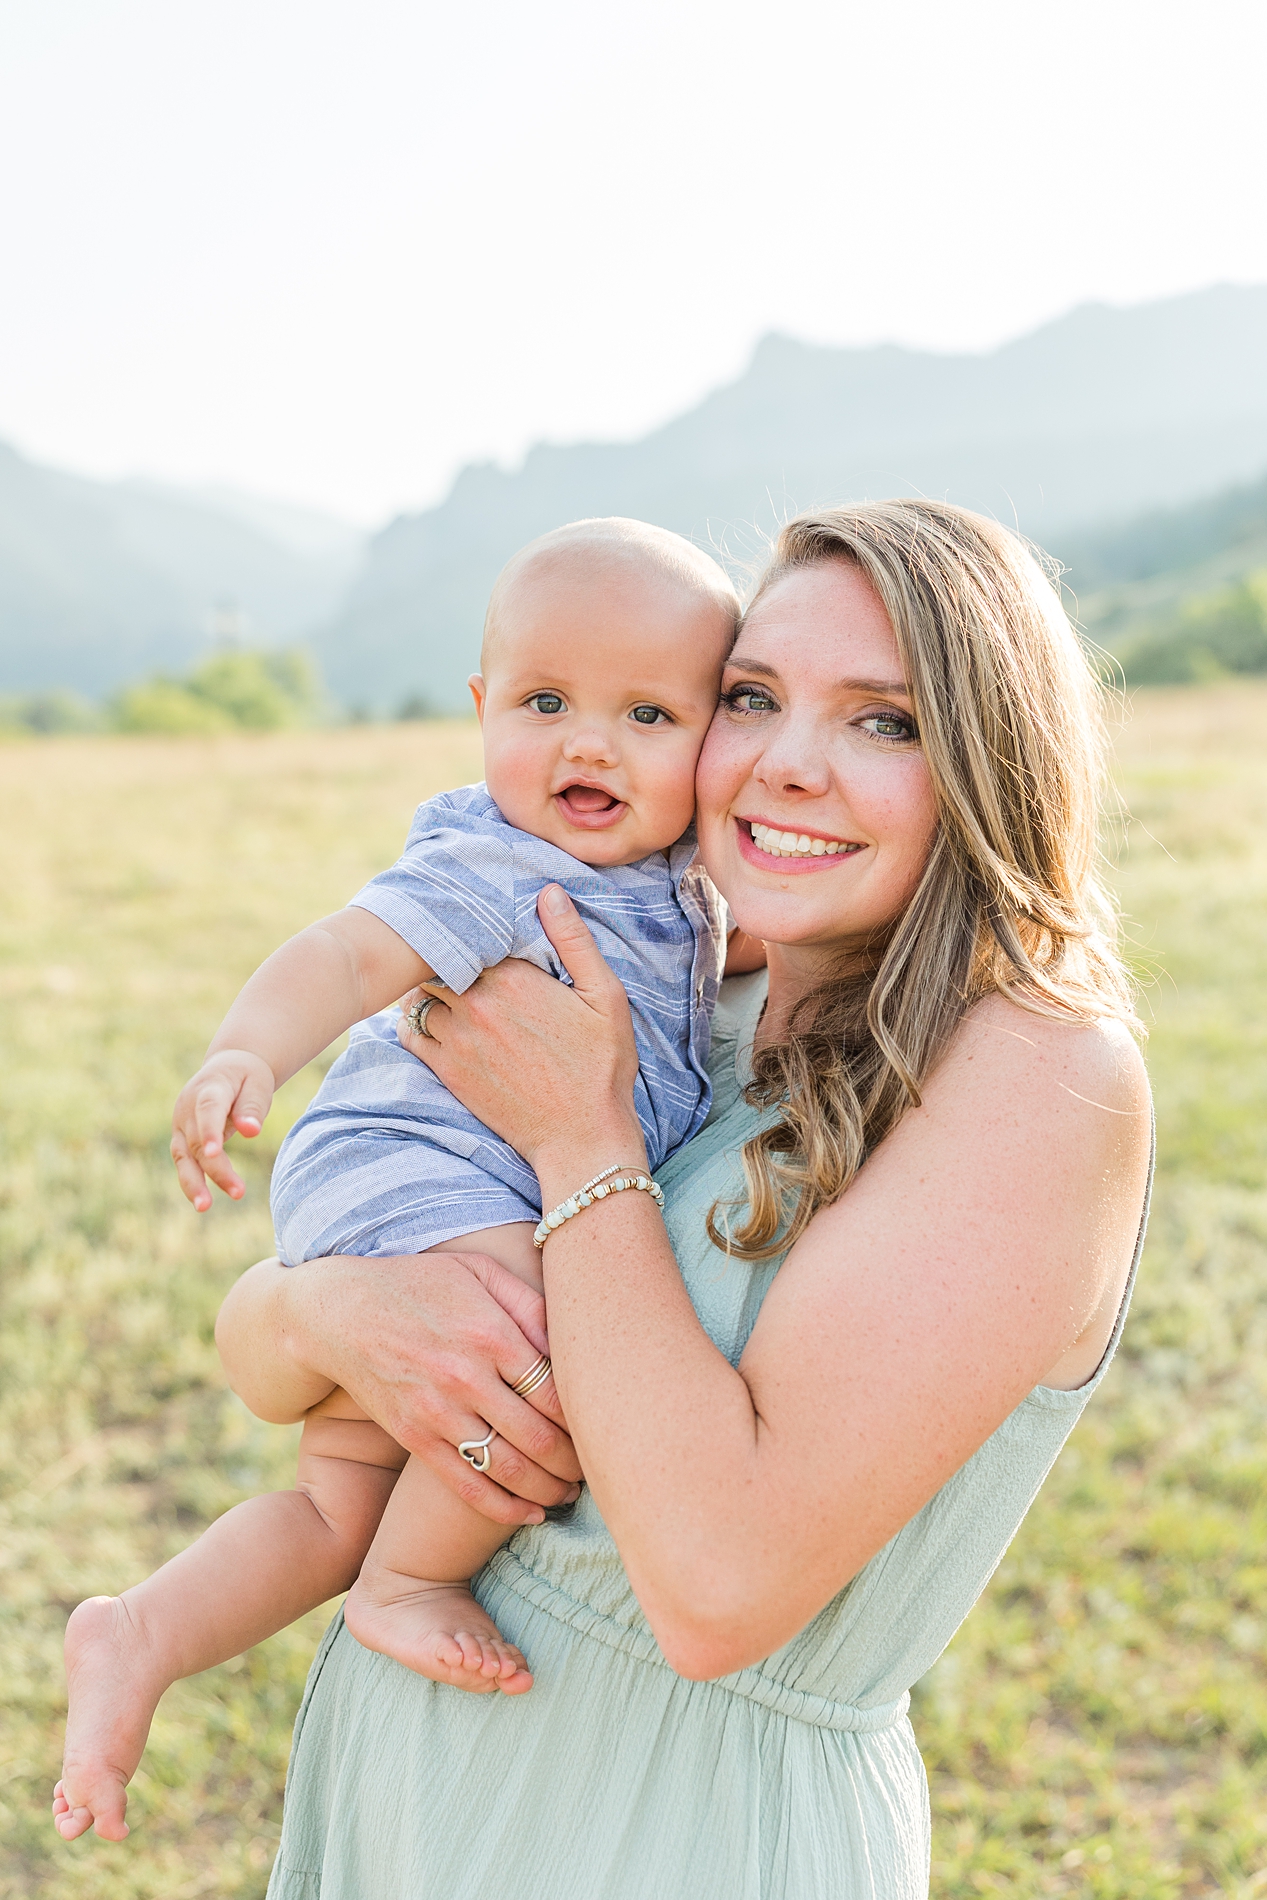 Mom holds baby boy at South Mesa Trailhead, Boulder, CO - Northern Colorado top 10 locations for family photos